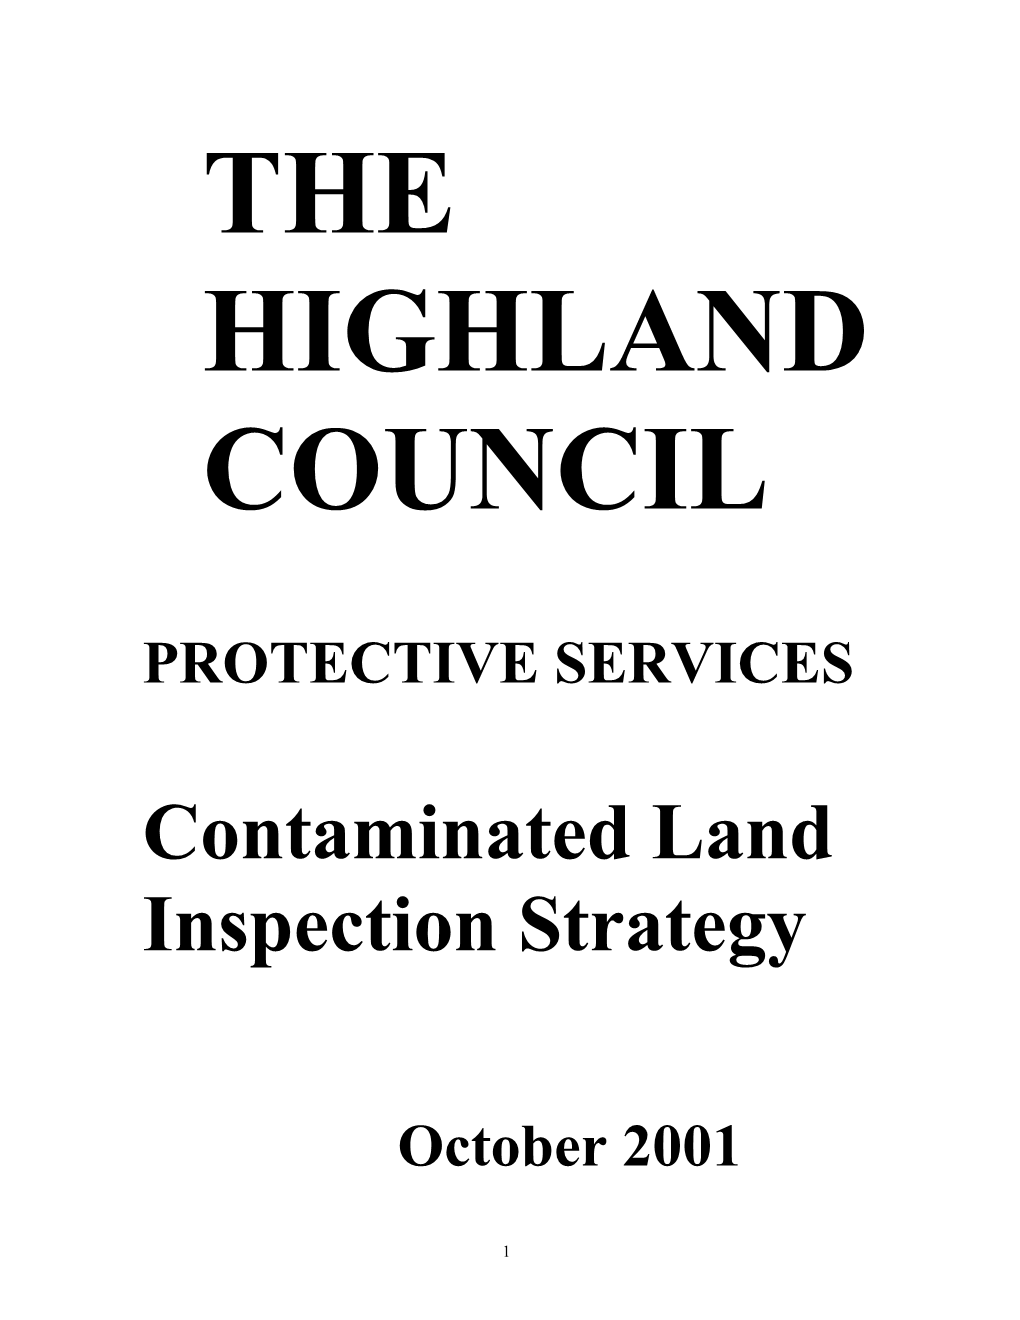 The Highland Council Contaminated Land Strategy